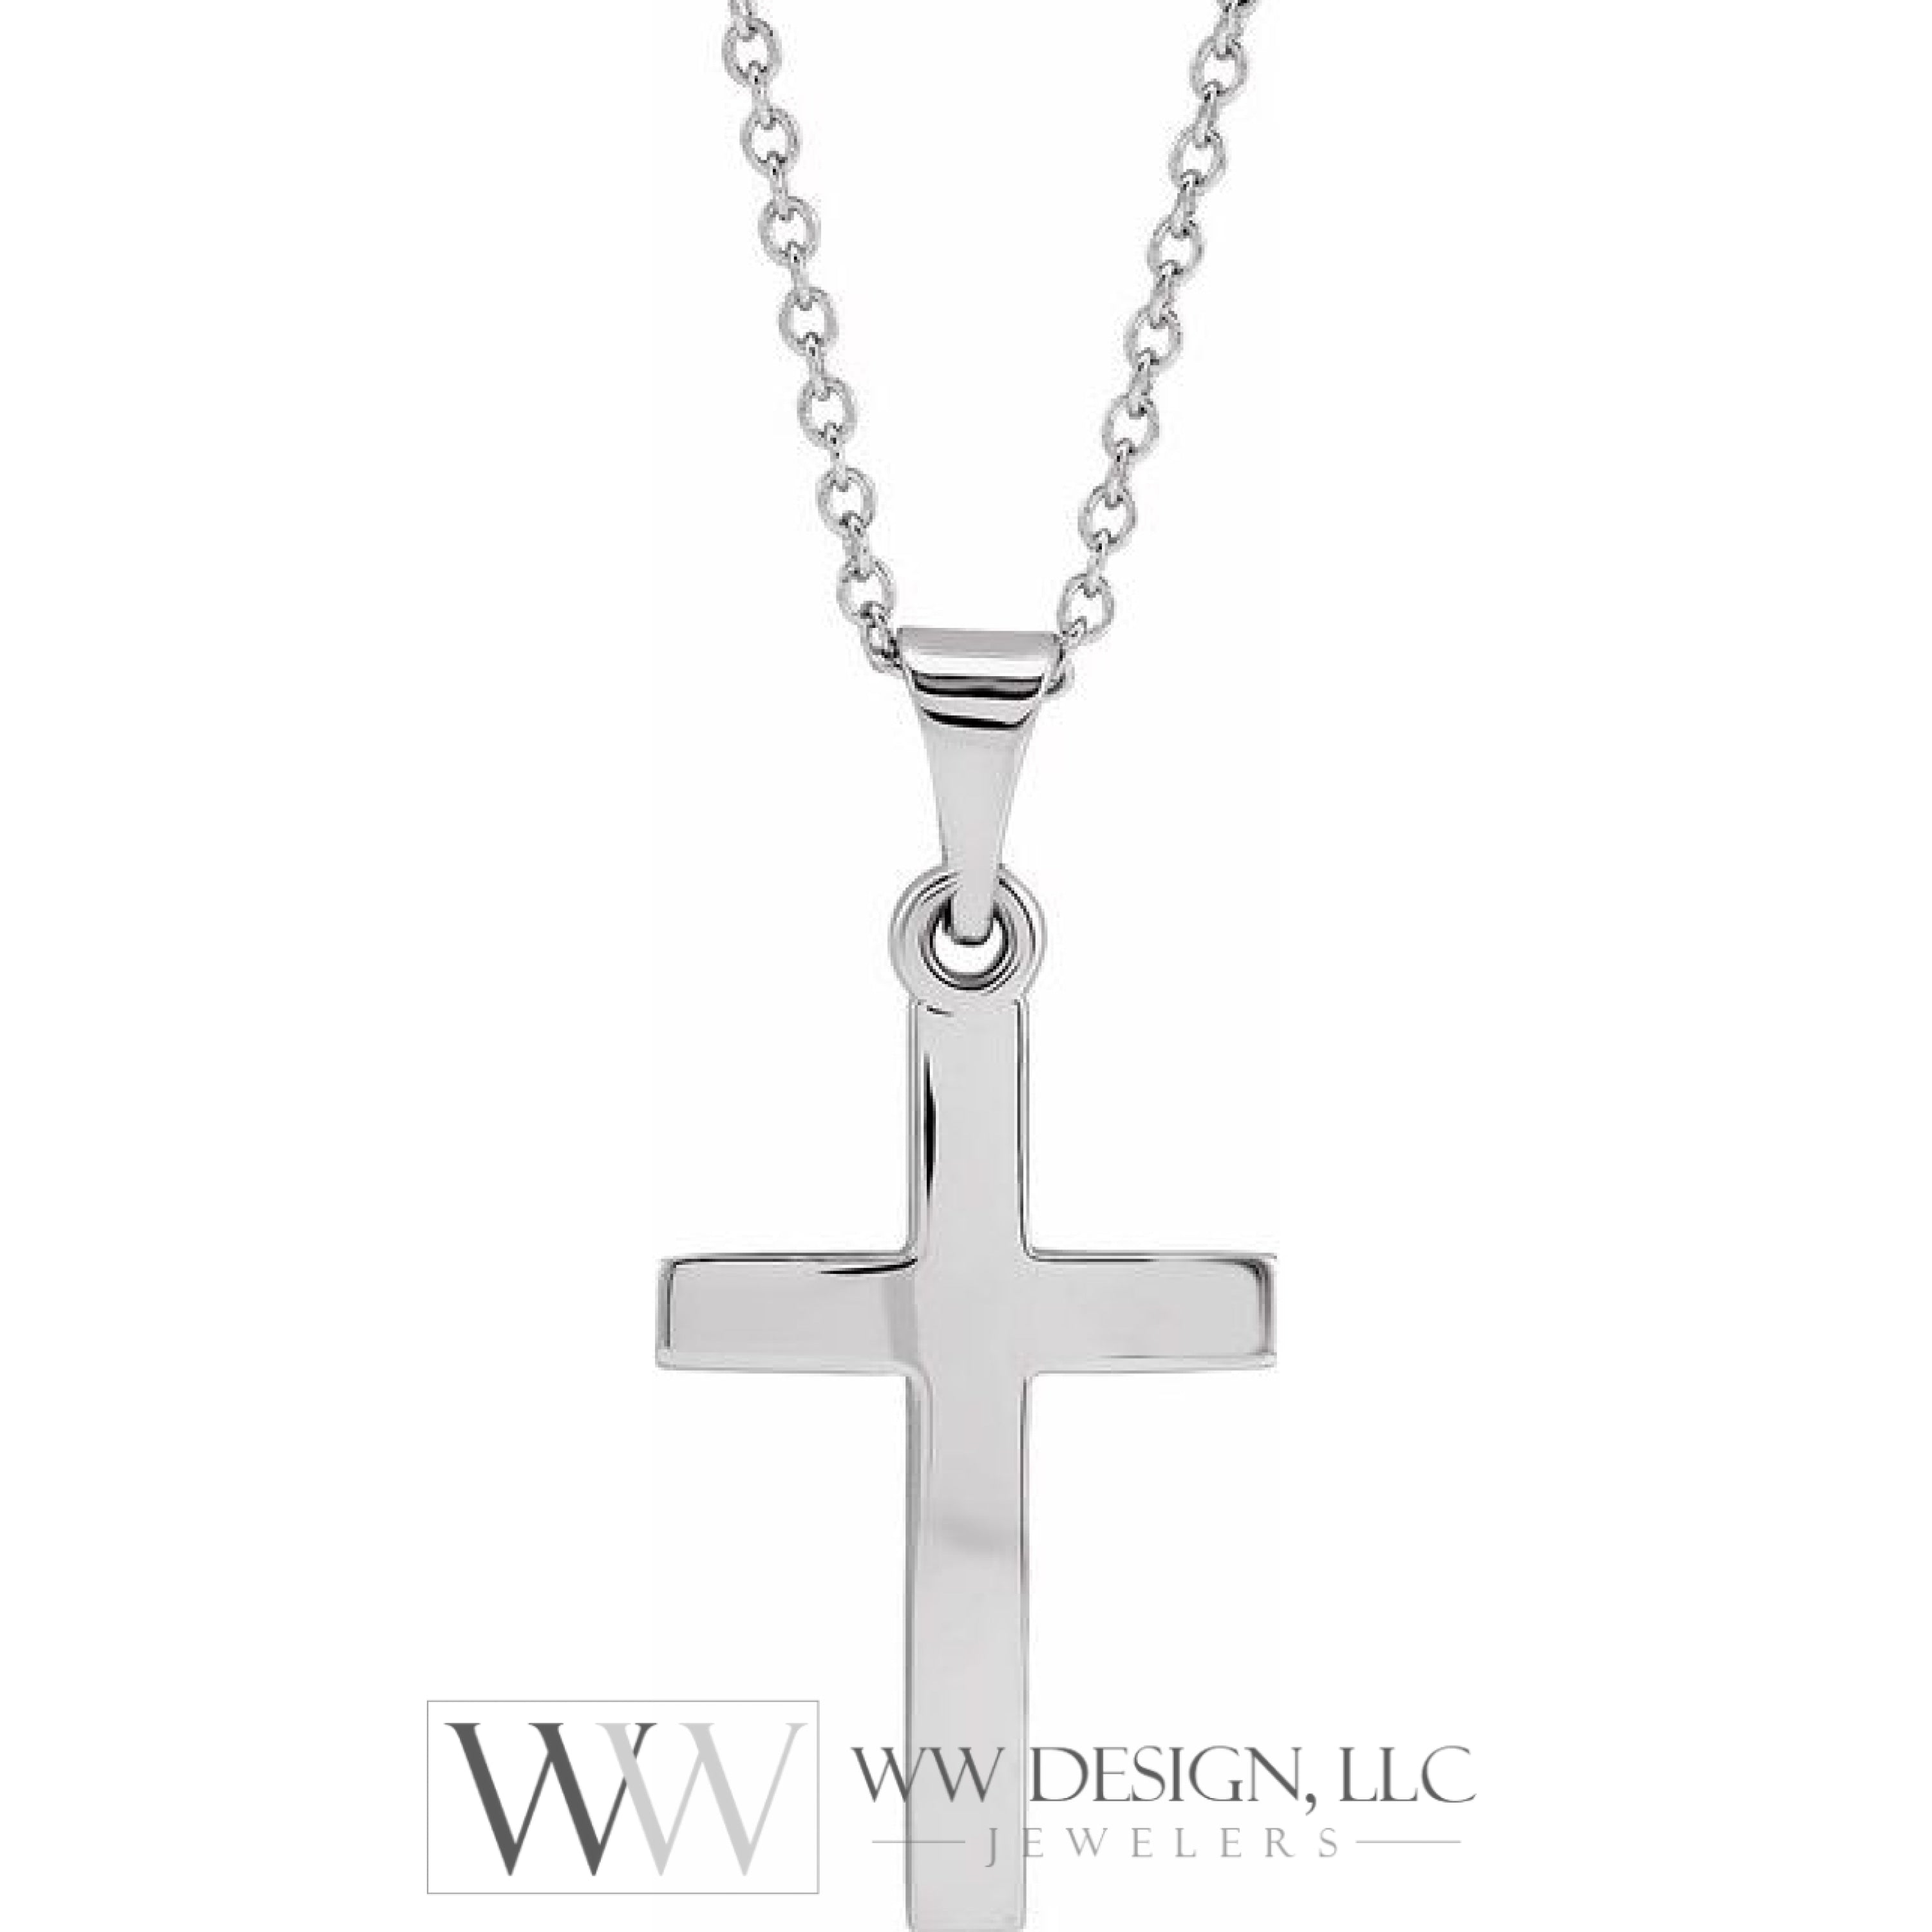 17mm x 11.5mm Cross 18" Necklace - 14K Gold (Y, W, or R), or Sterling Silver